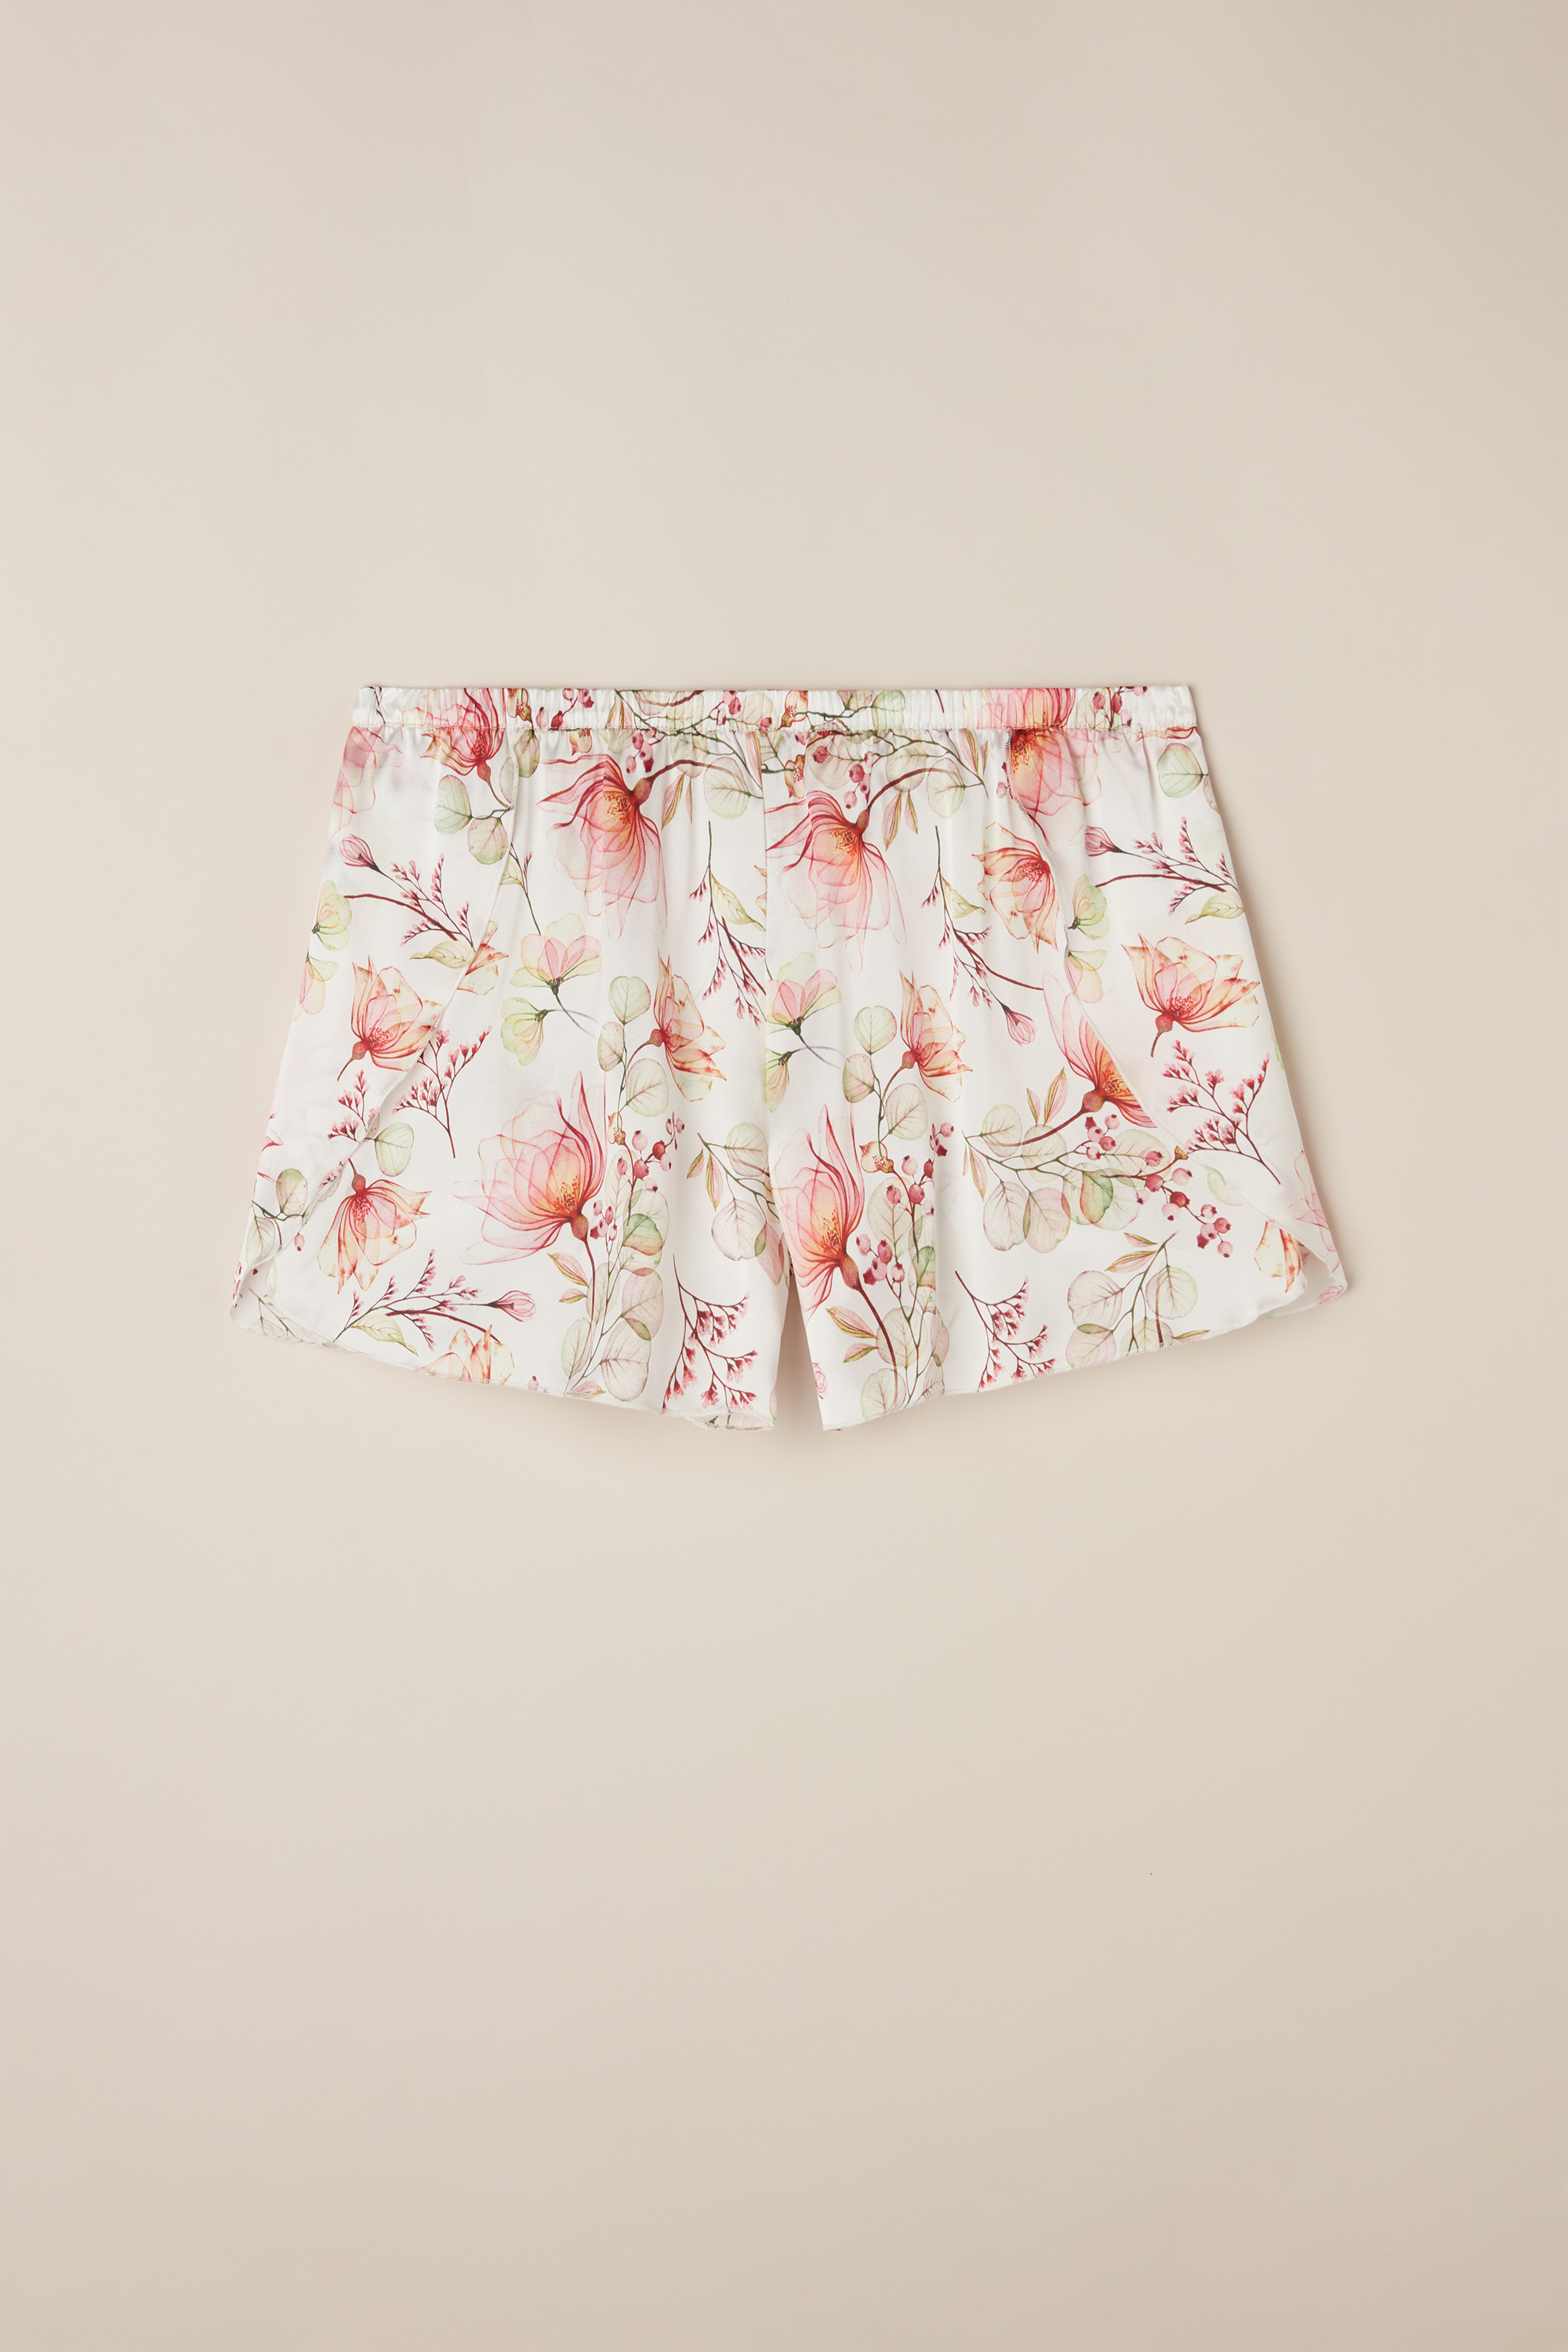 Smell the Flowers シルク ショートパンツ | Intimissimi